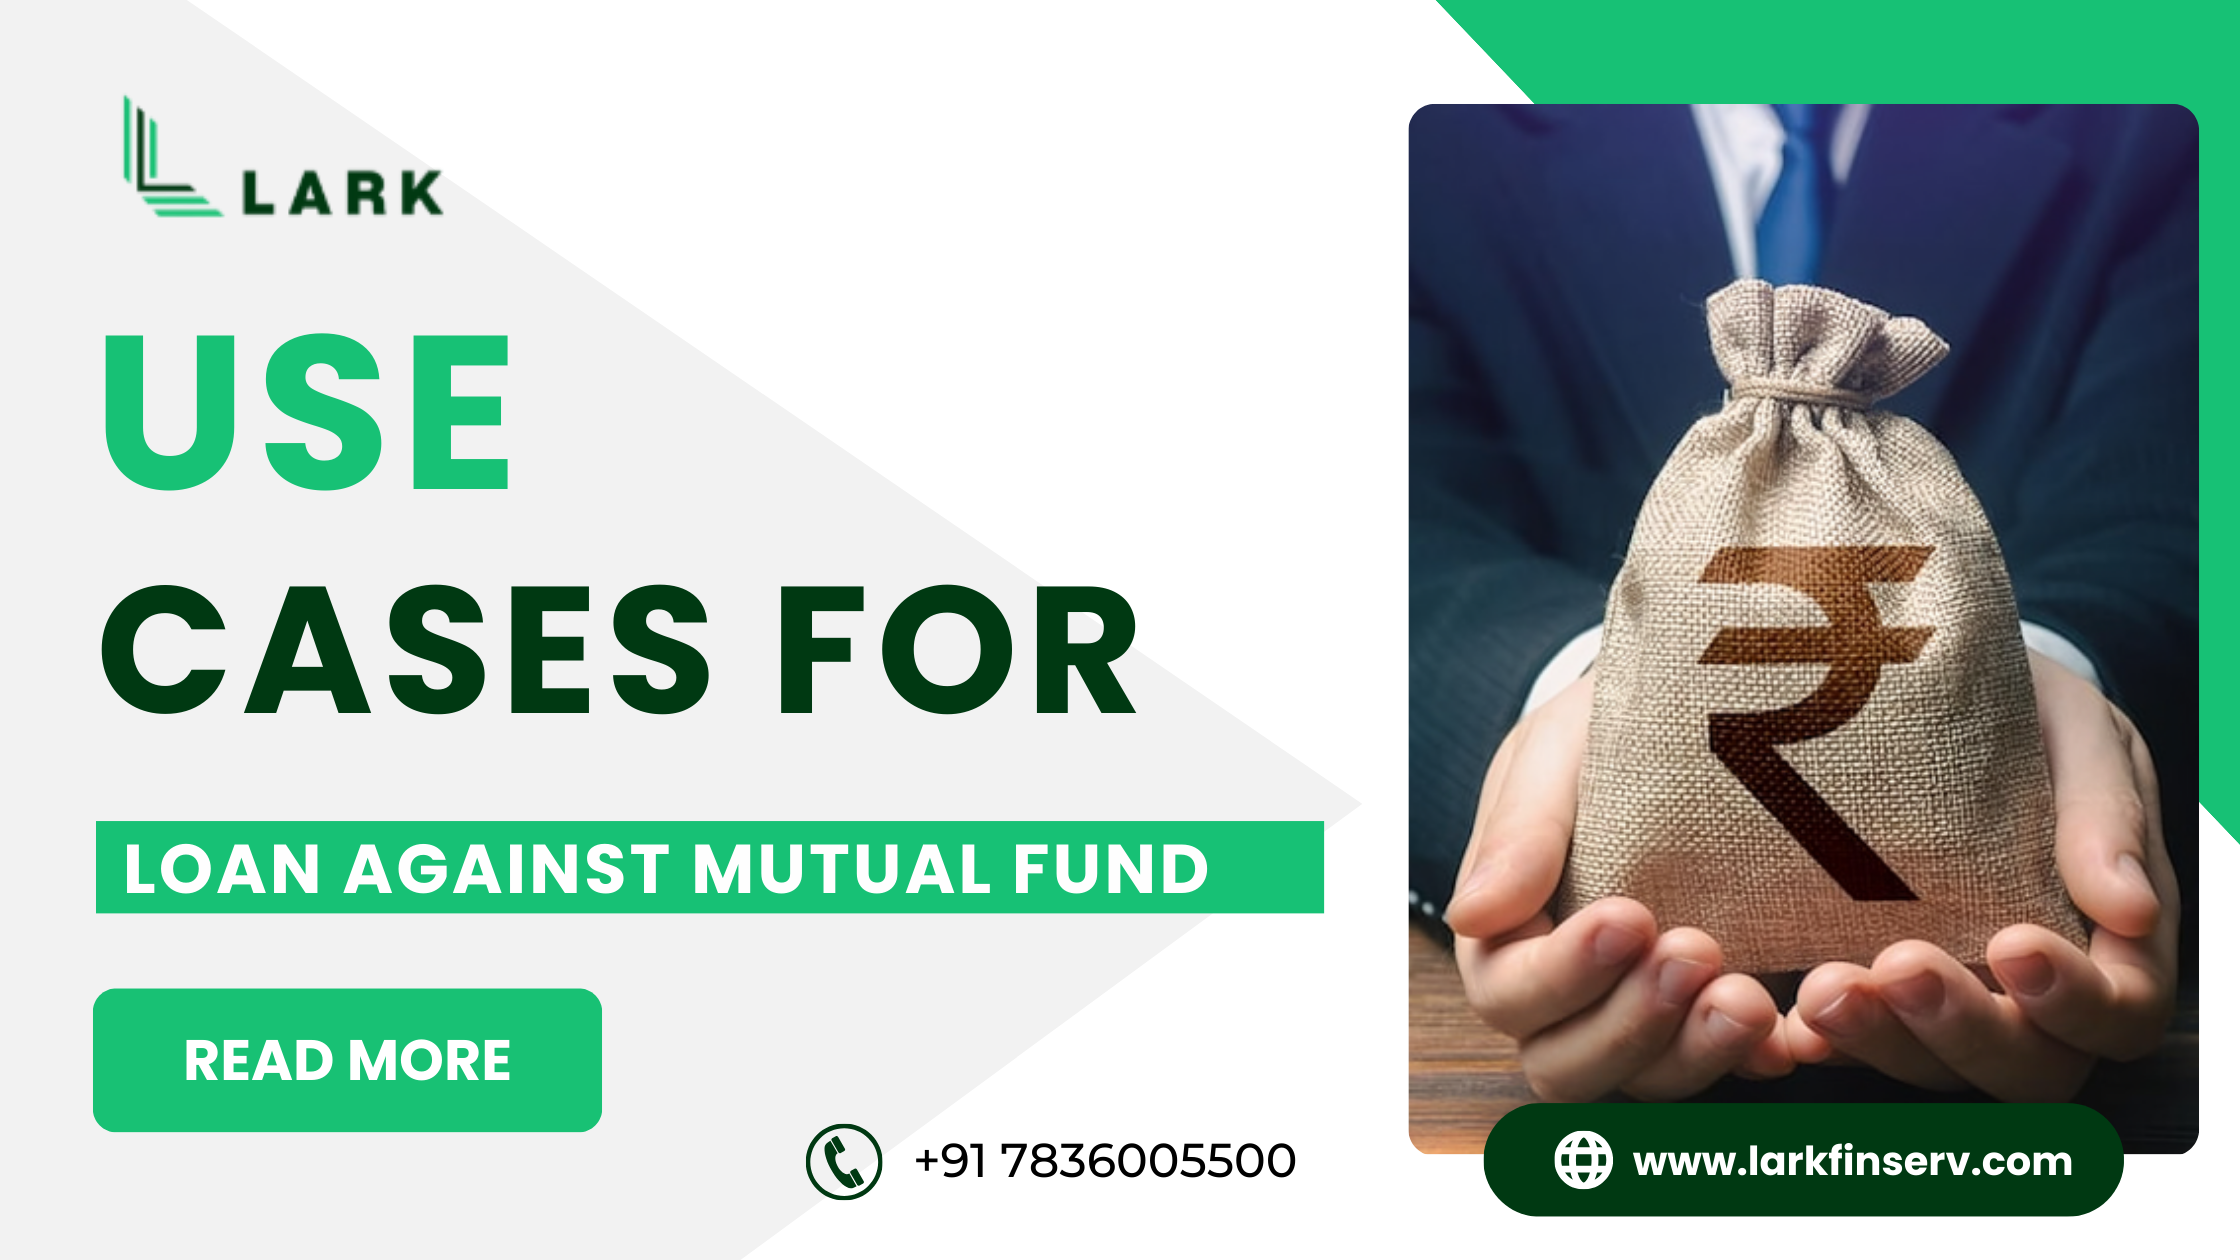 Use Cases for Loan Against Mutual Fund in India